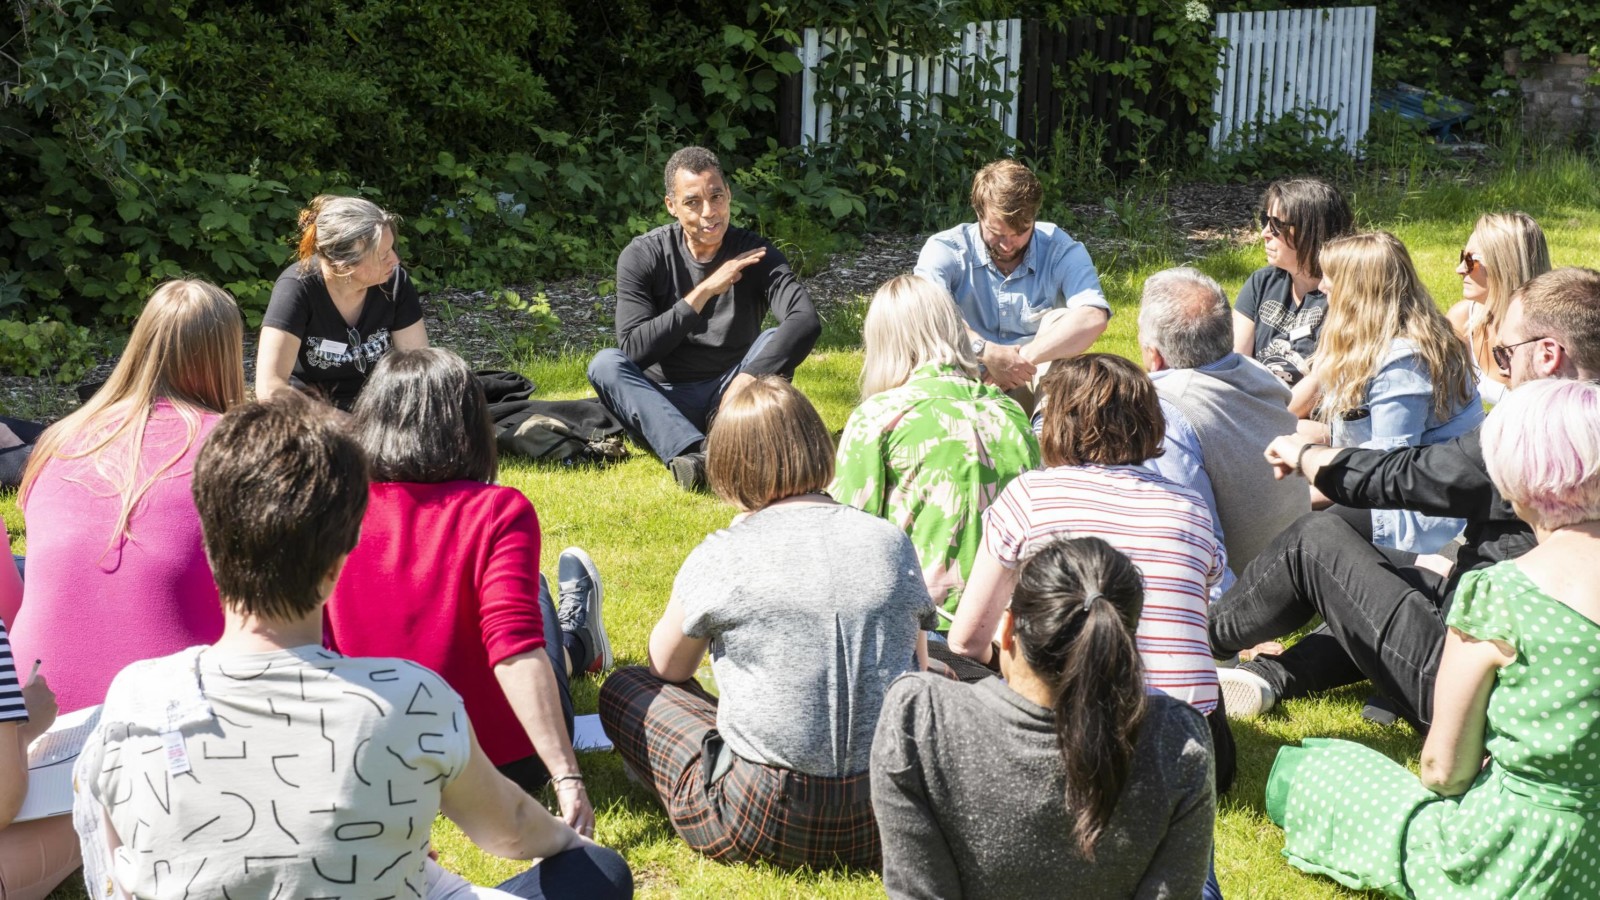 A group of people wearing brightly coloured clothes sit in an informal circle on a patch of grass. They appear to be listening to a speaker, a black man wearing a dark jacket and dark trousers. In the background there is green foliage.